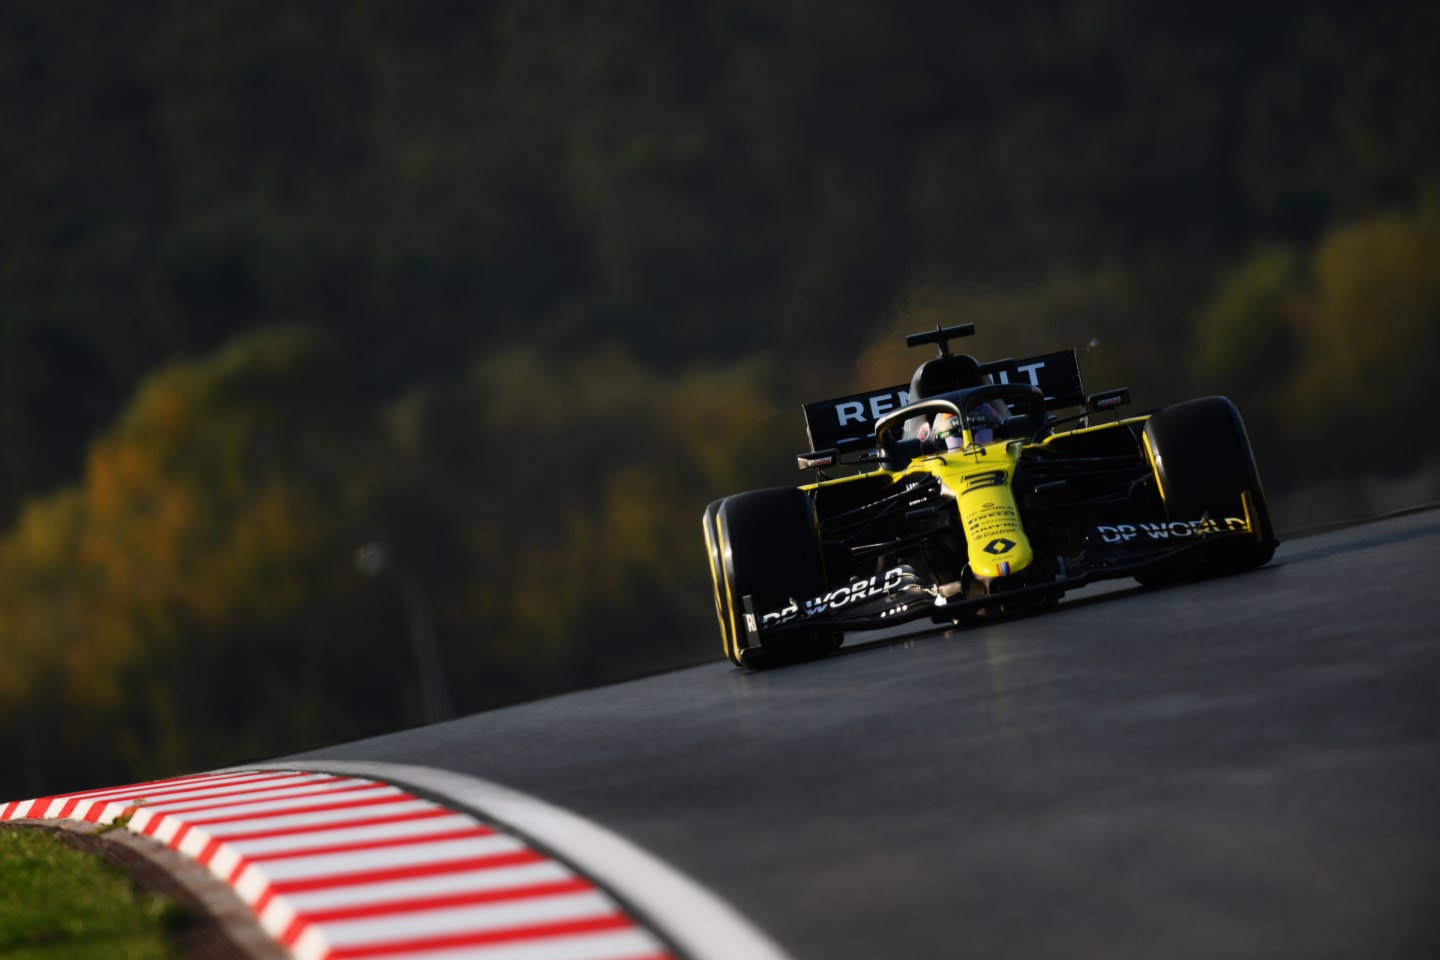 ISTANBUL, TURKEY - NOVEMBER 13: Daniel Ricciardo of Australia driving the (3) Renault Sport Formula One Team RS20 on track during practice ahead of the F1 Grand Prix of Turkey at Intercity Istanbul Park on November 13, 2020 in Istanbul, Turkey. (Photo by Clive Mason/Getty Images)